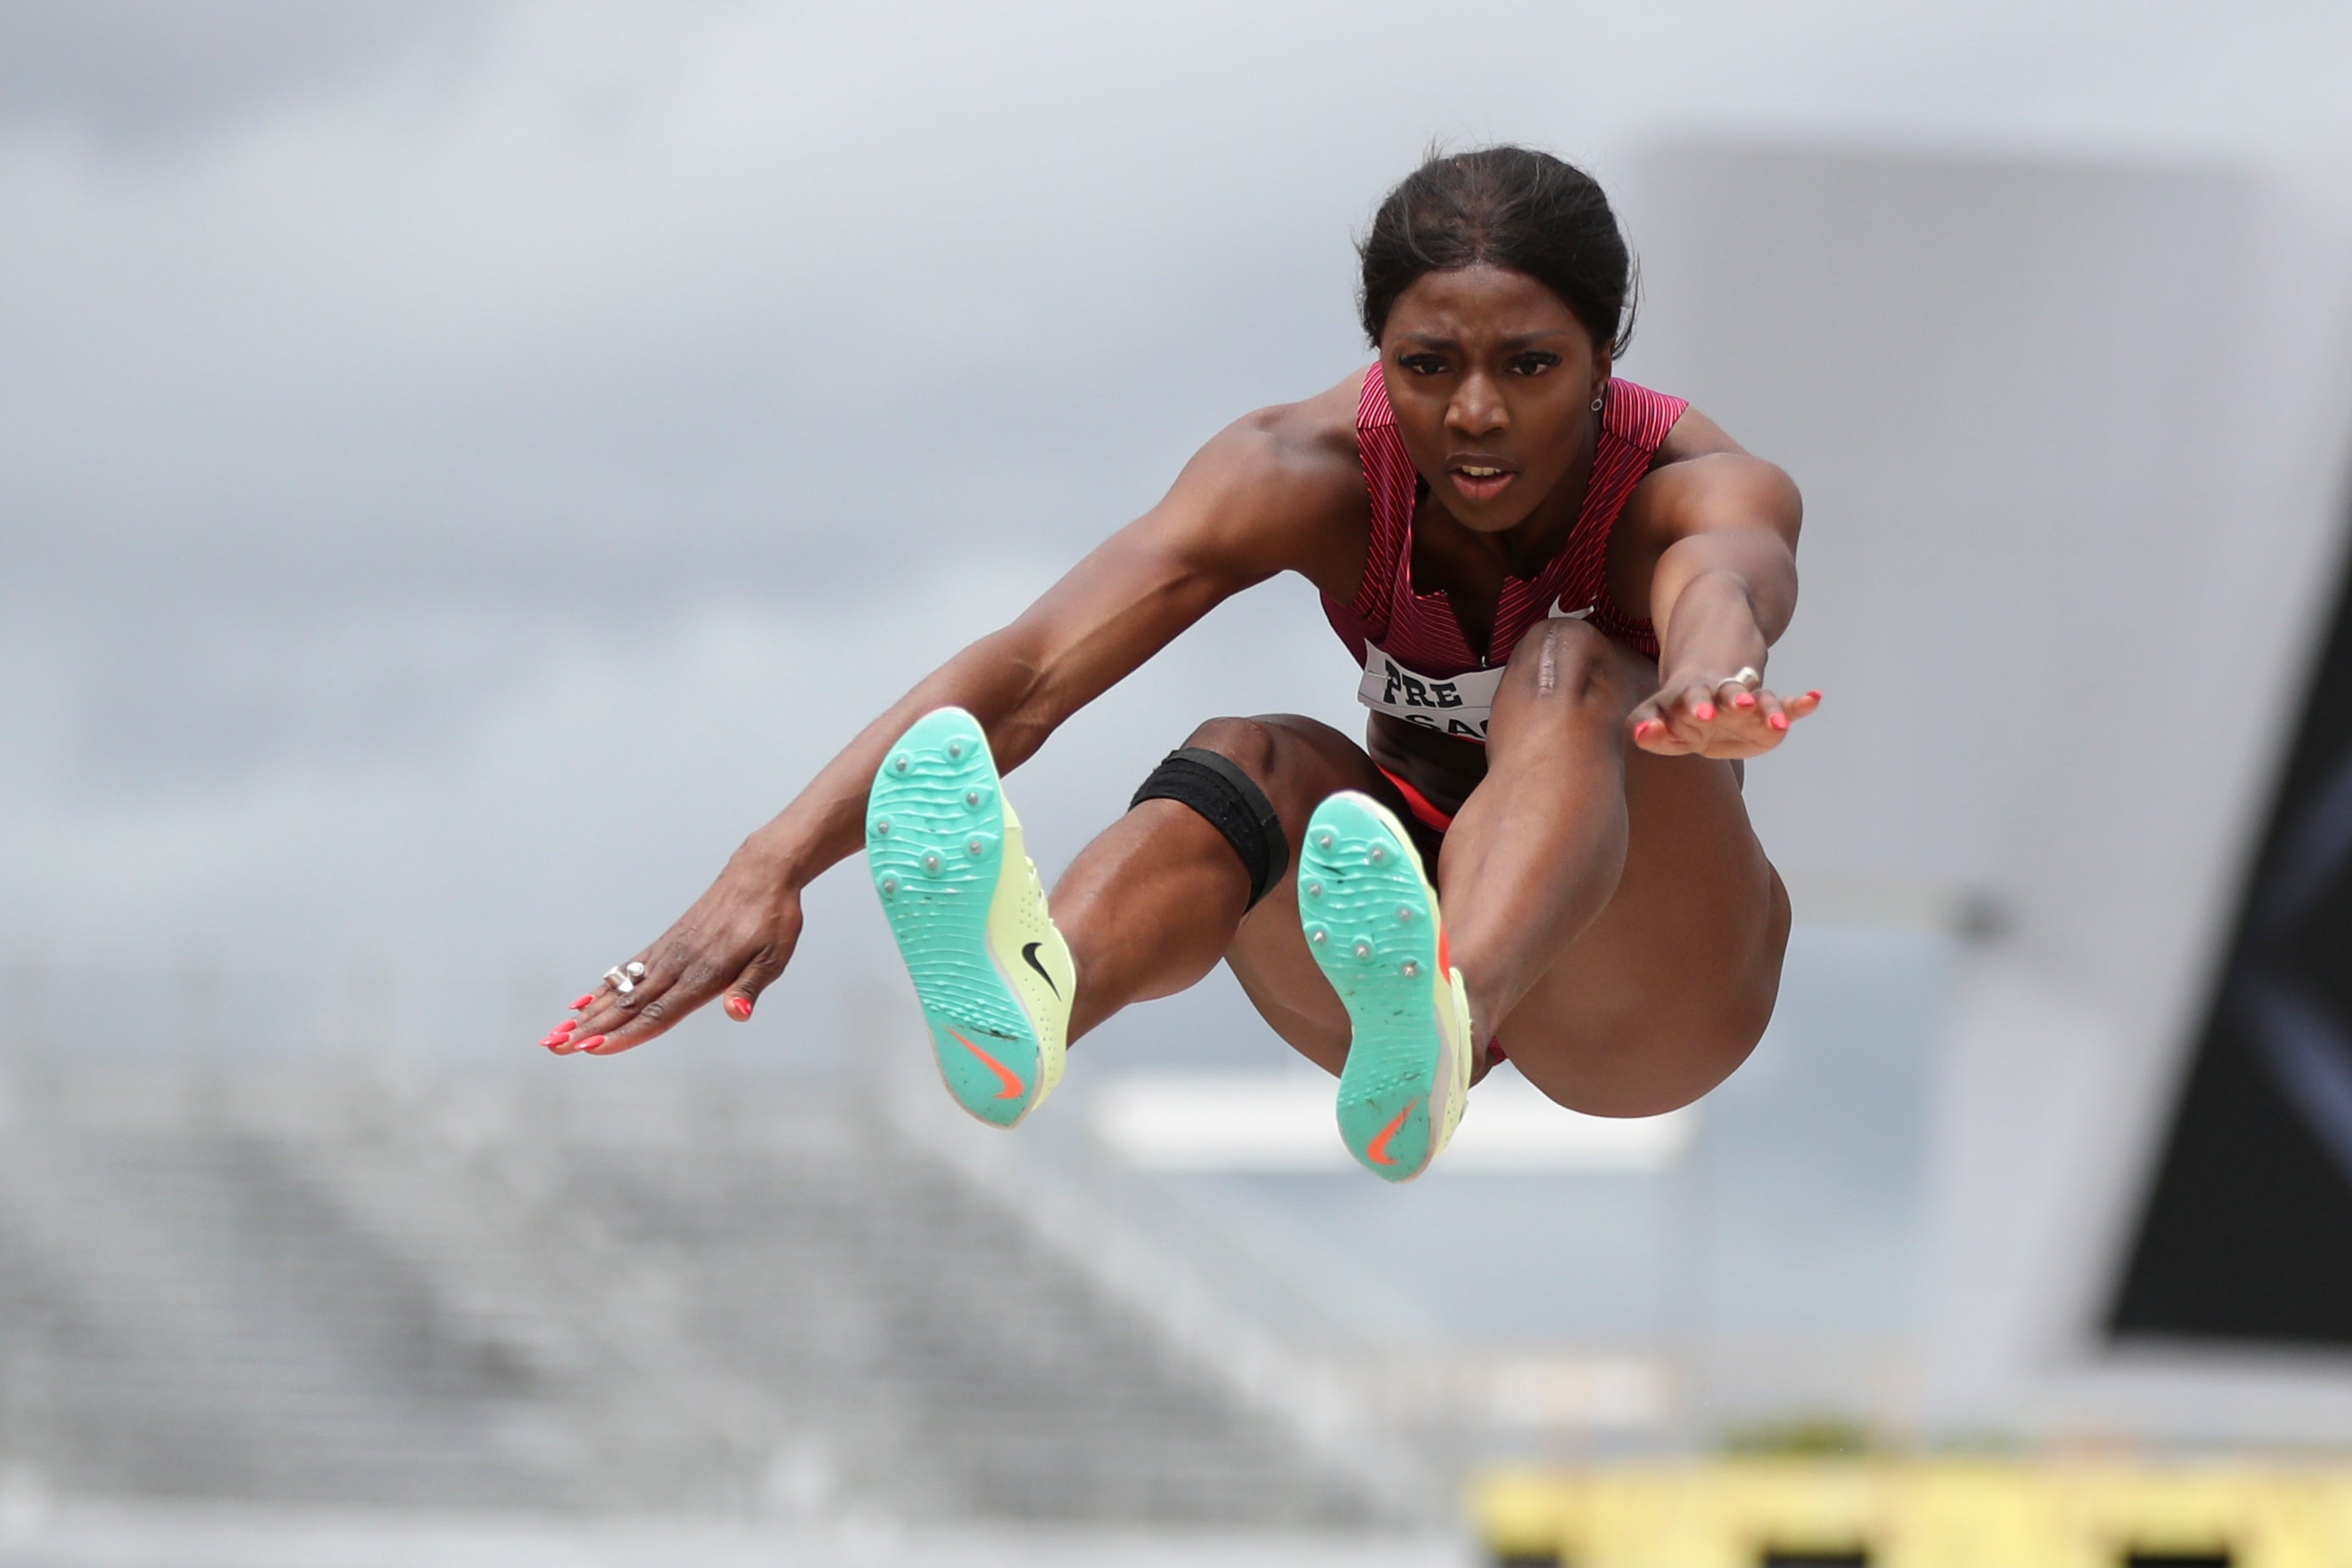 Sweden’s Khaddi Sagnia competes in the women’s long jump at the Prefontaine Classic in Eugene (Amanda Loman/AP/PA)